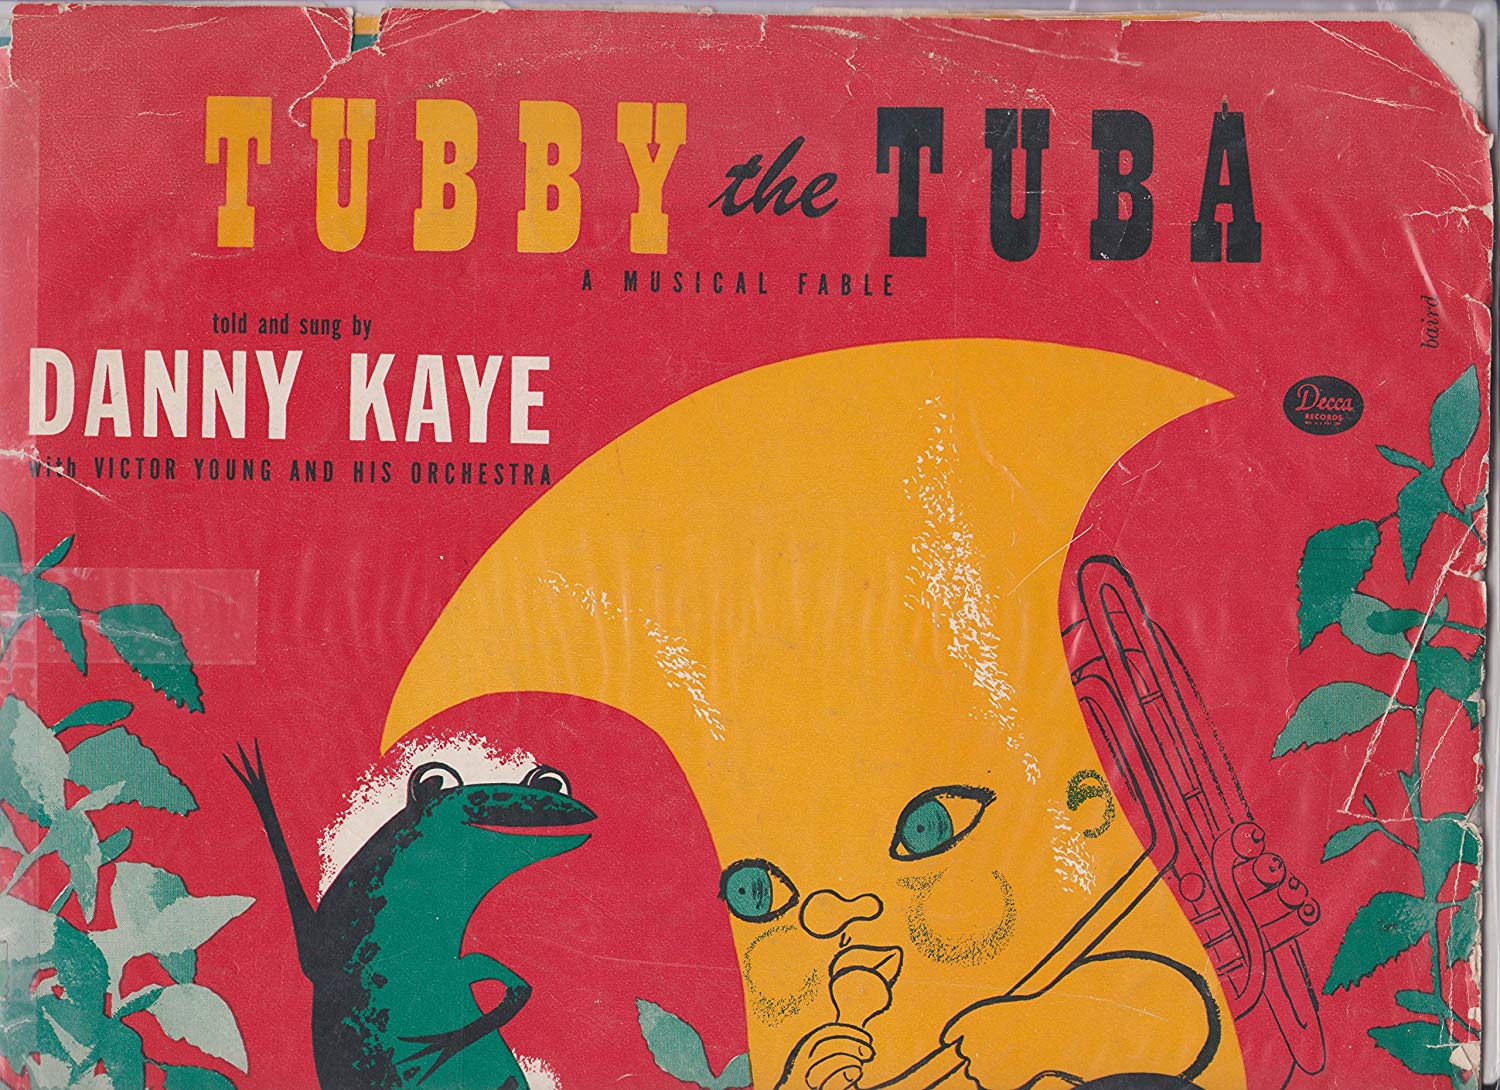 Tubby the Tuba - lyrics were written by Paul Tripp and music composed by George Kleinsinger. The original recording featured Tripp's narration. The second recording, released on the Decca label, was sung by Danny Kaye.